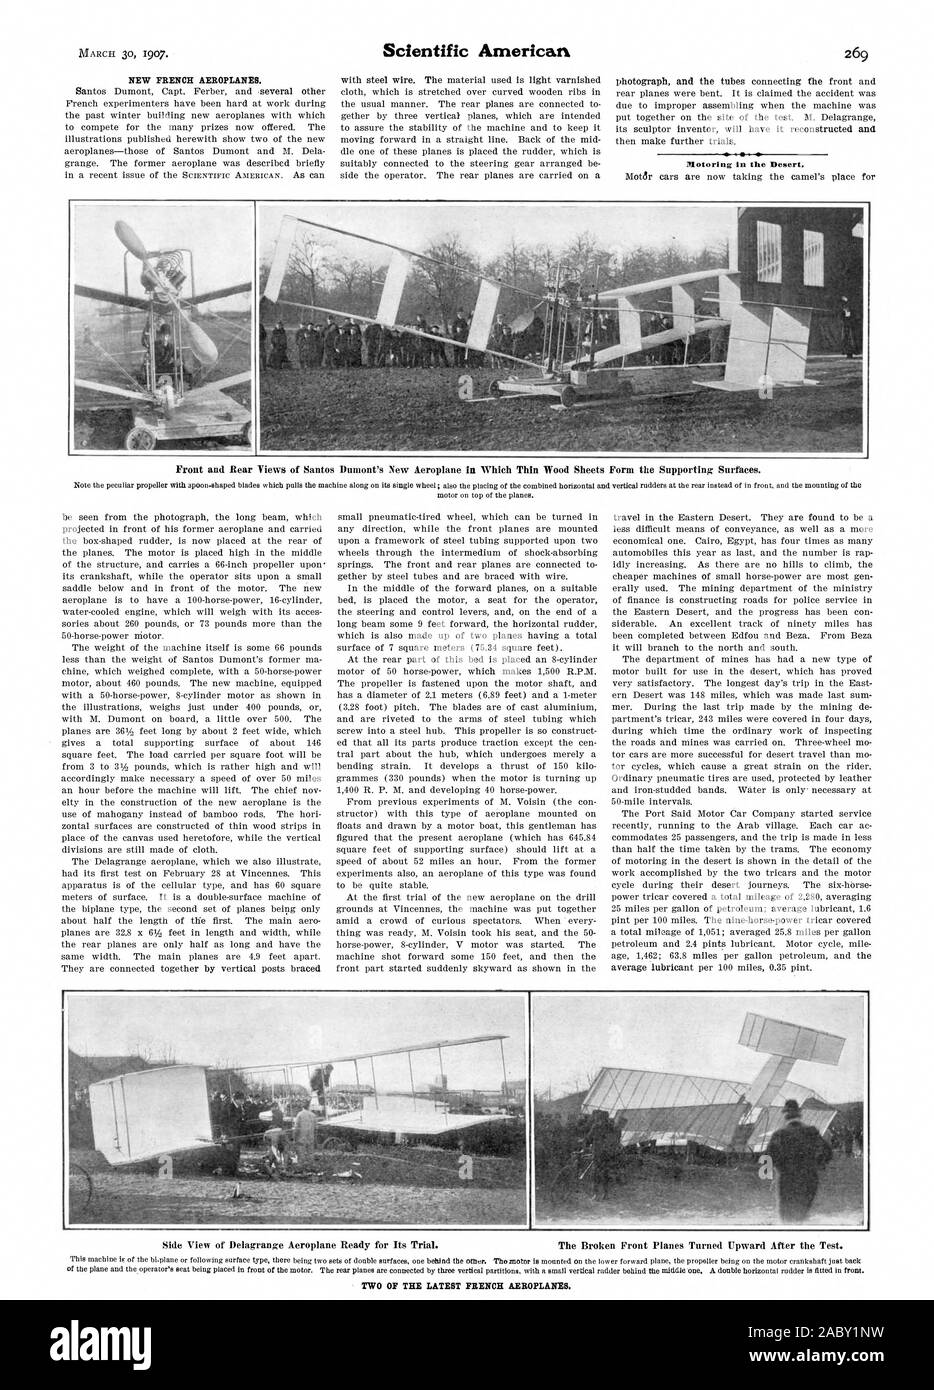 NEW FRENCH AEROPLANES. Motoring in the Desert. Front and Rear 'Views of Santos Dumont's New Aeroplane in Which Thin Wood Sheets Form the Supporting Surfaces. TWO OF THE LATEST FRENCH AEROPLANES., scientific american, 1907-03-30 Stock Photo